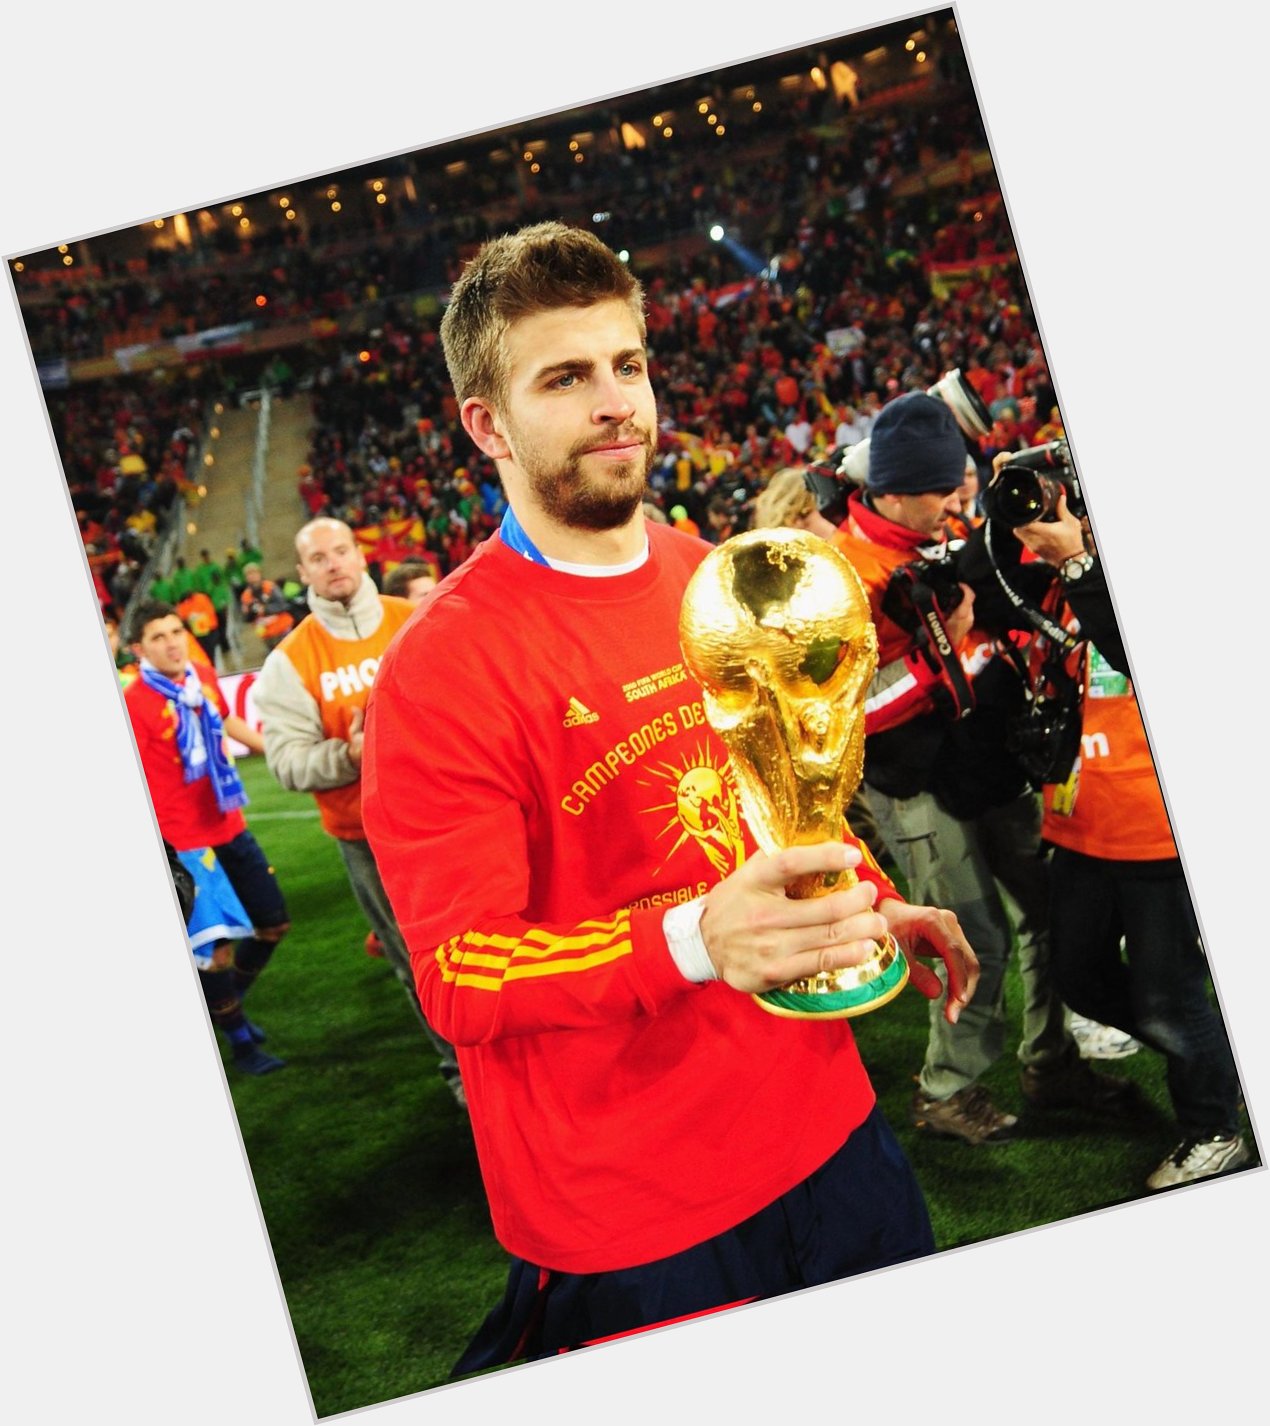 Happy birthday to Gerard Piqué, not sure the ex will be sending him a birthday card 